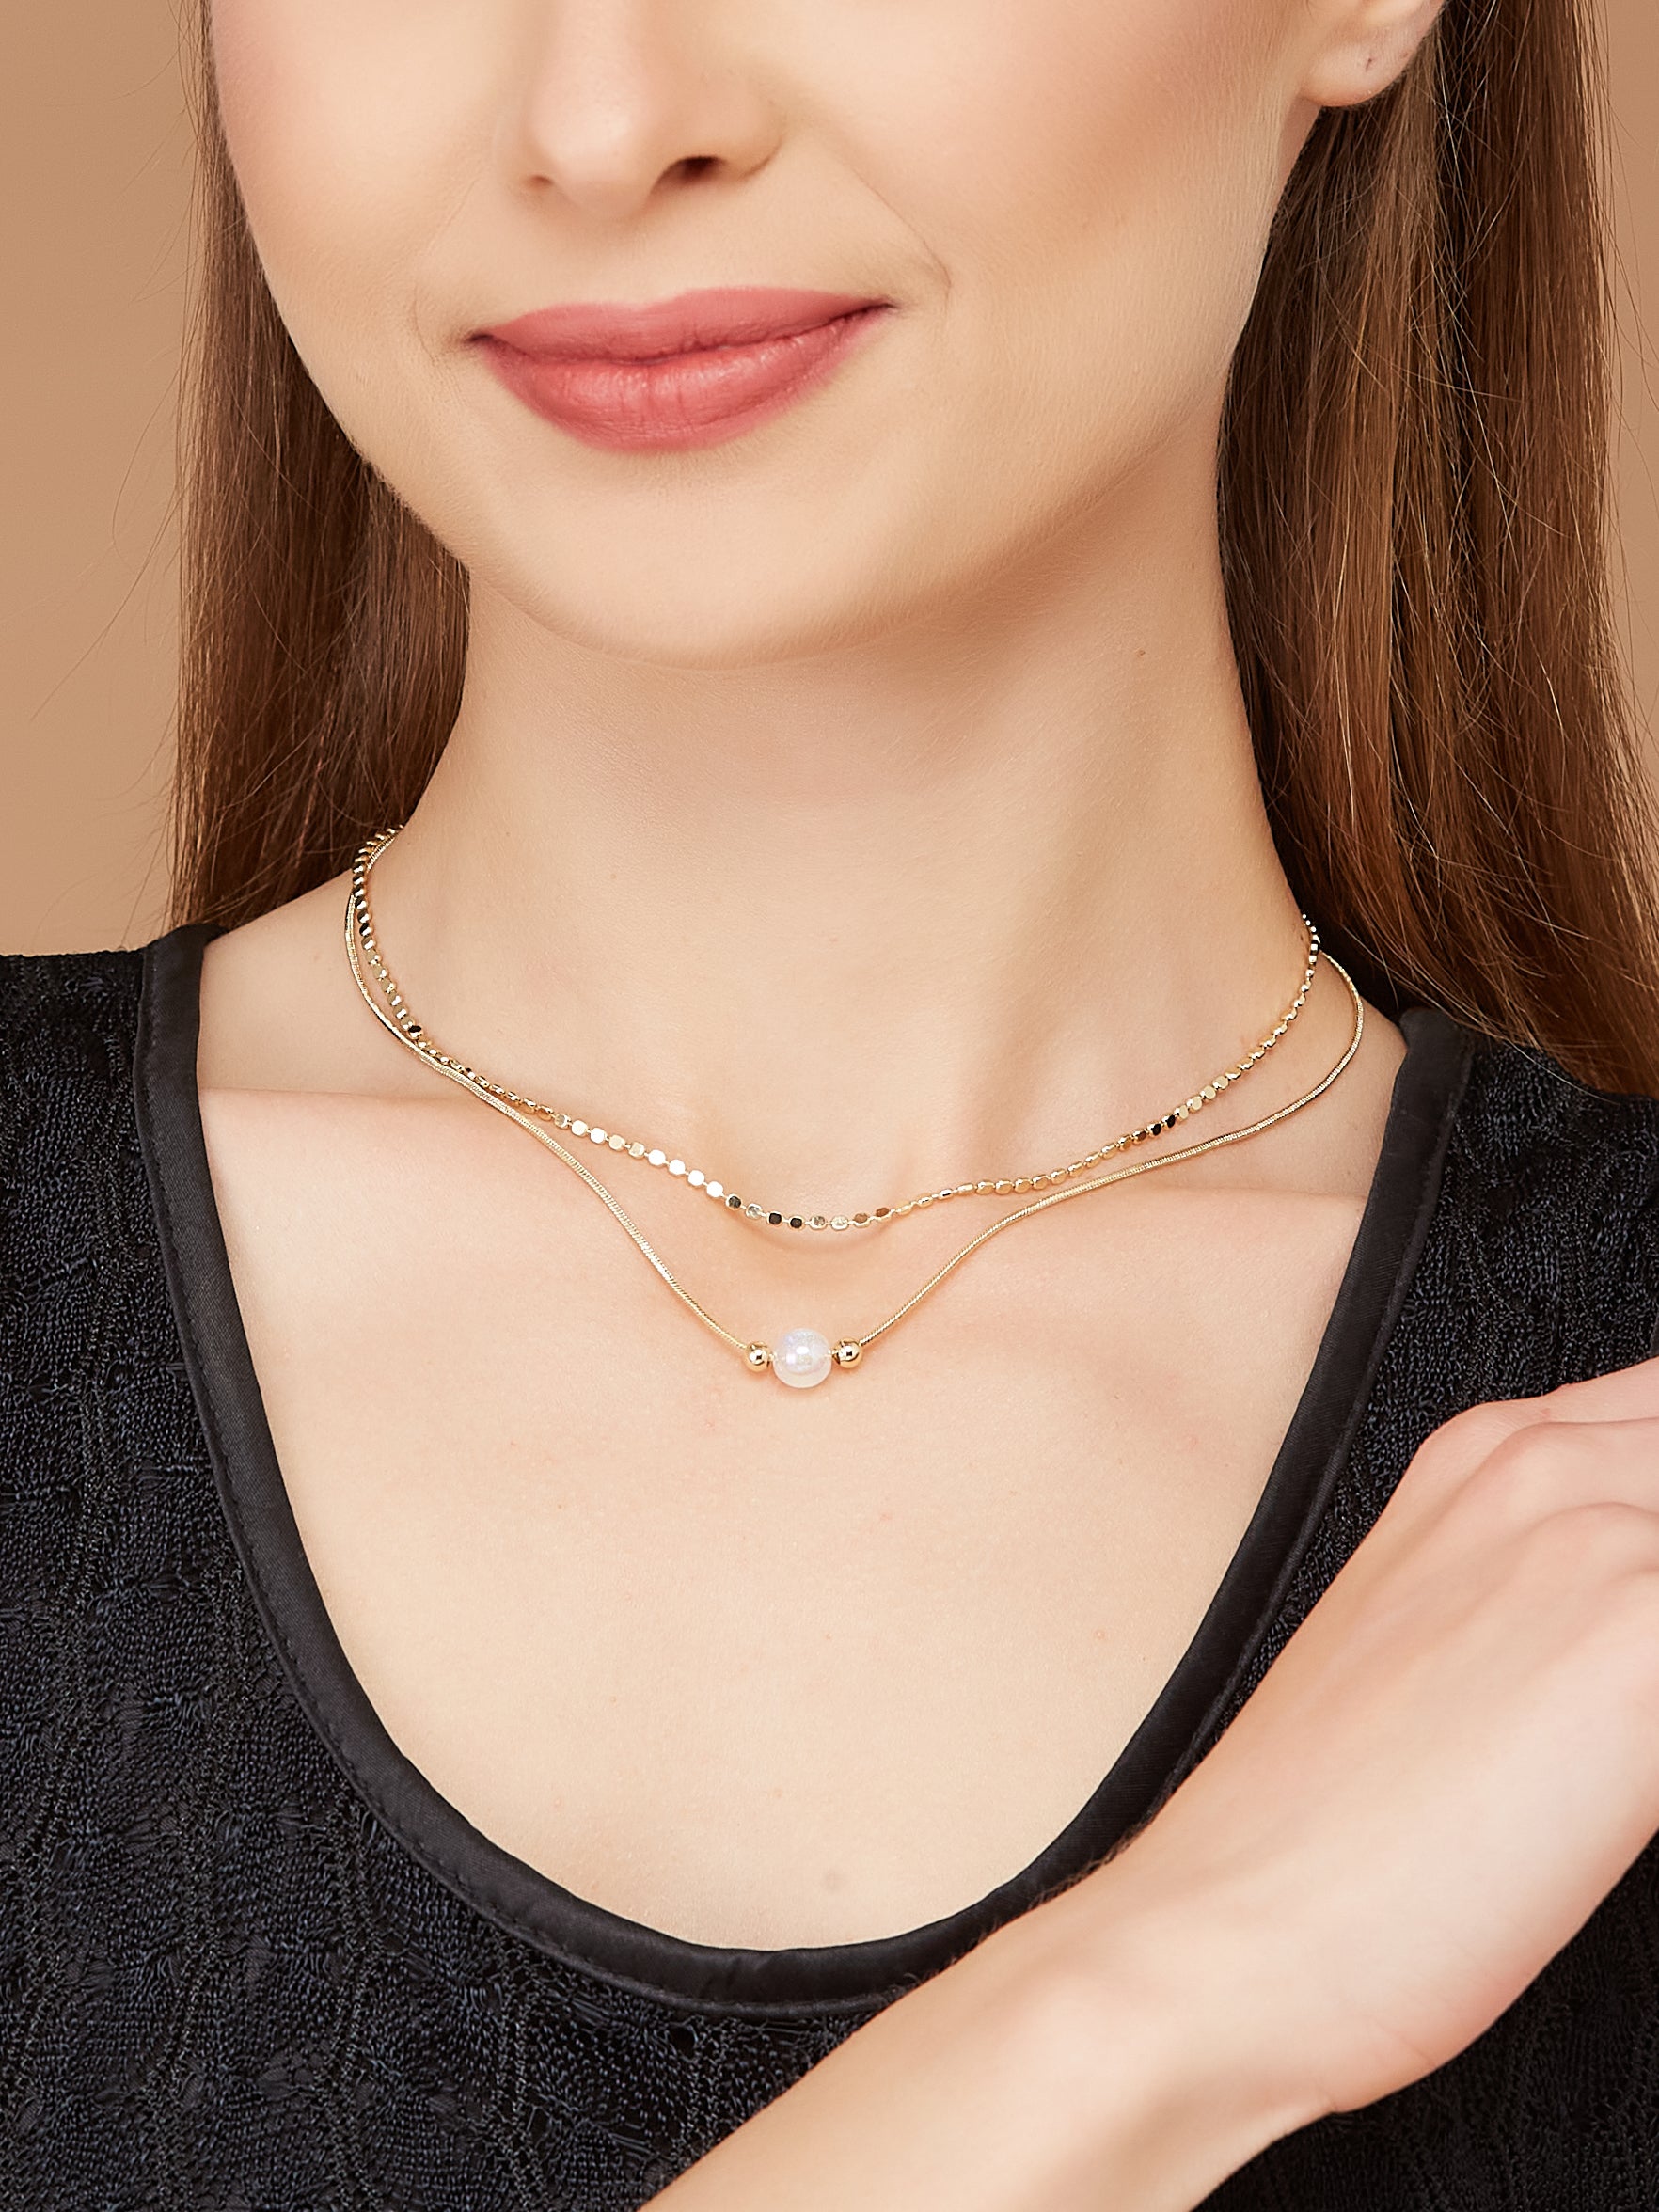 Gold Plated Double Chain with Pearl for women & girls